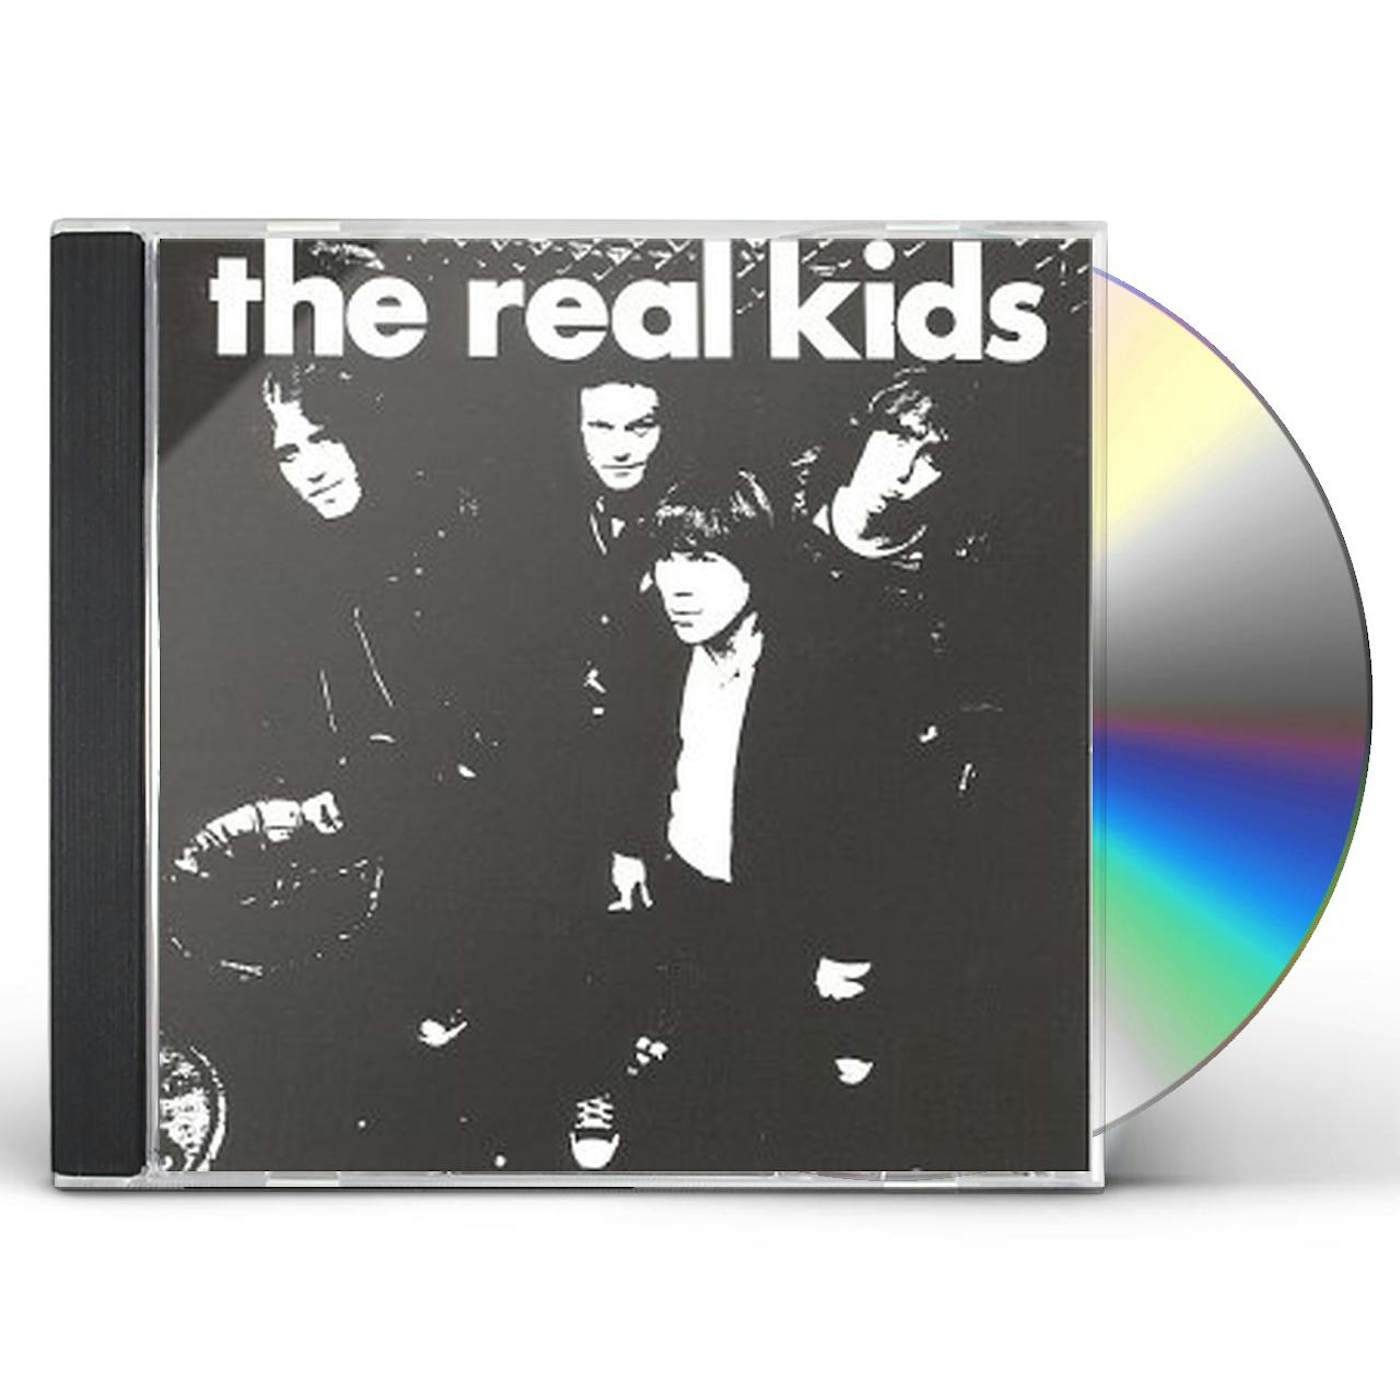 The Real Kids CD